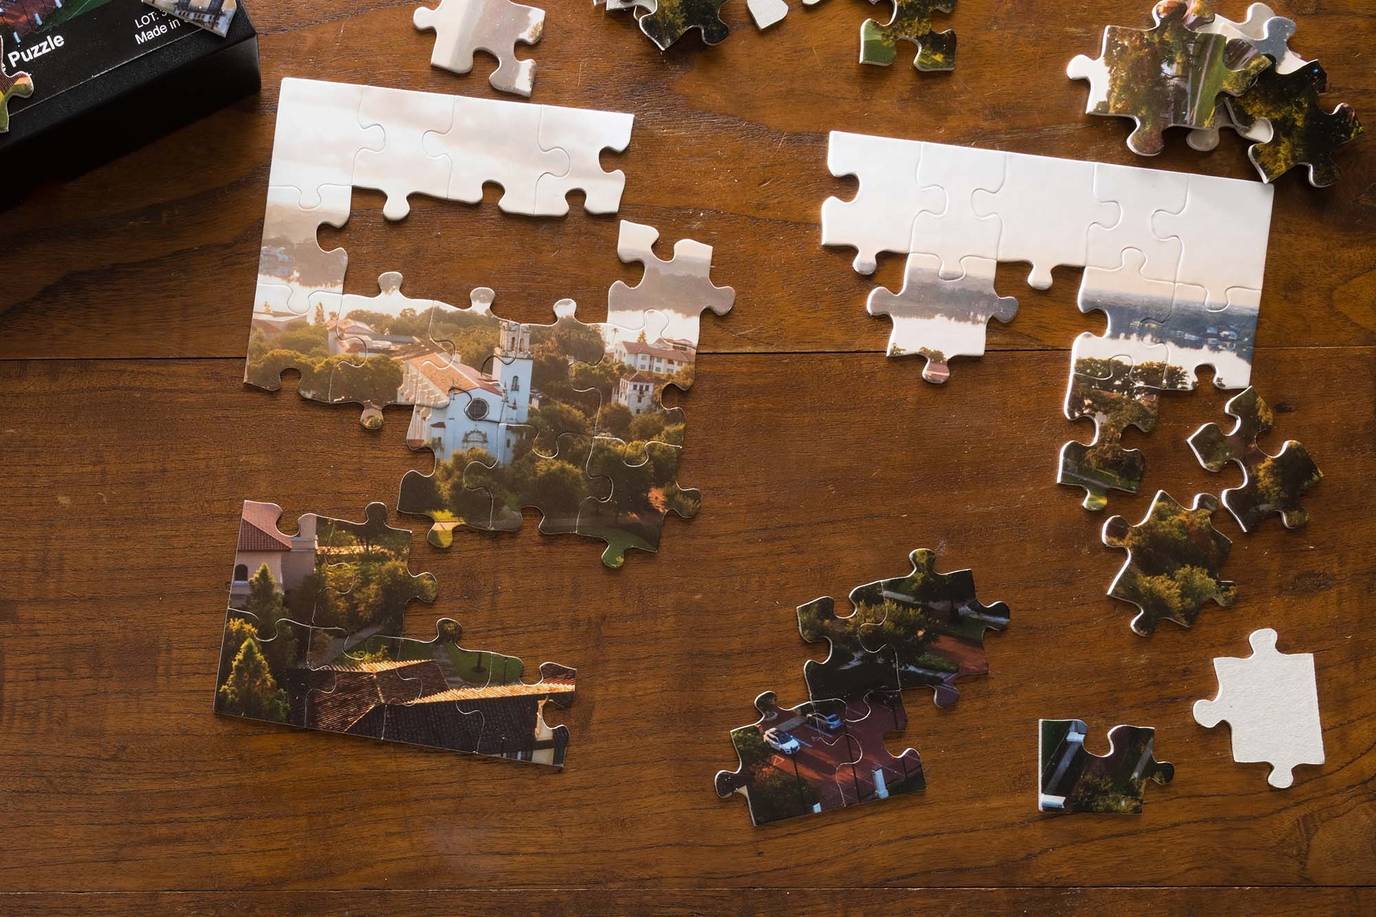 A half-completed puzzle featuring the Rollins campus